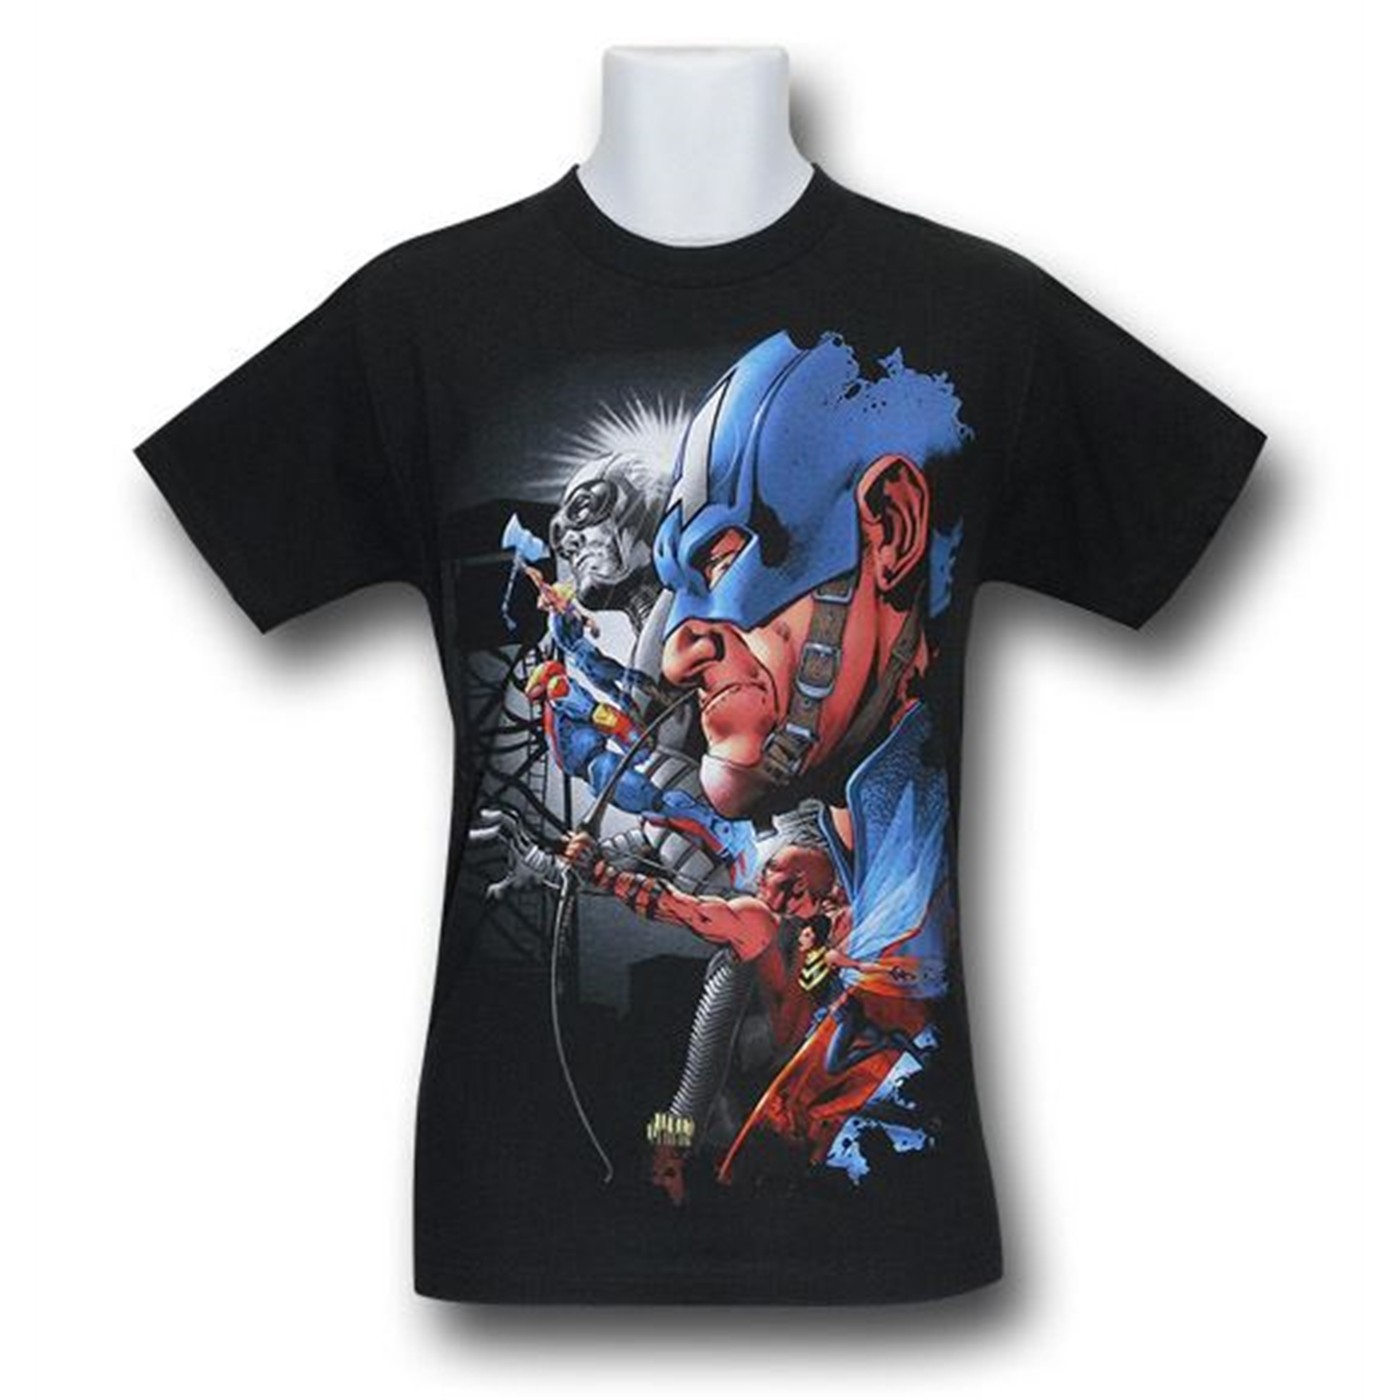 The Ultimates 2 by Bryan Hitch T-Shirt